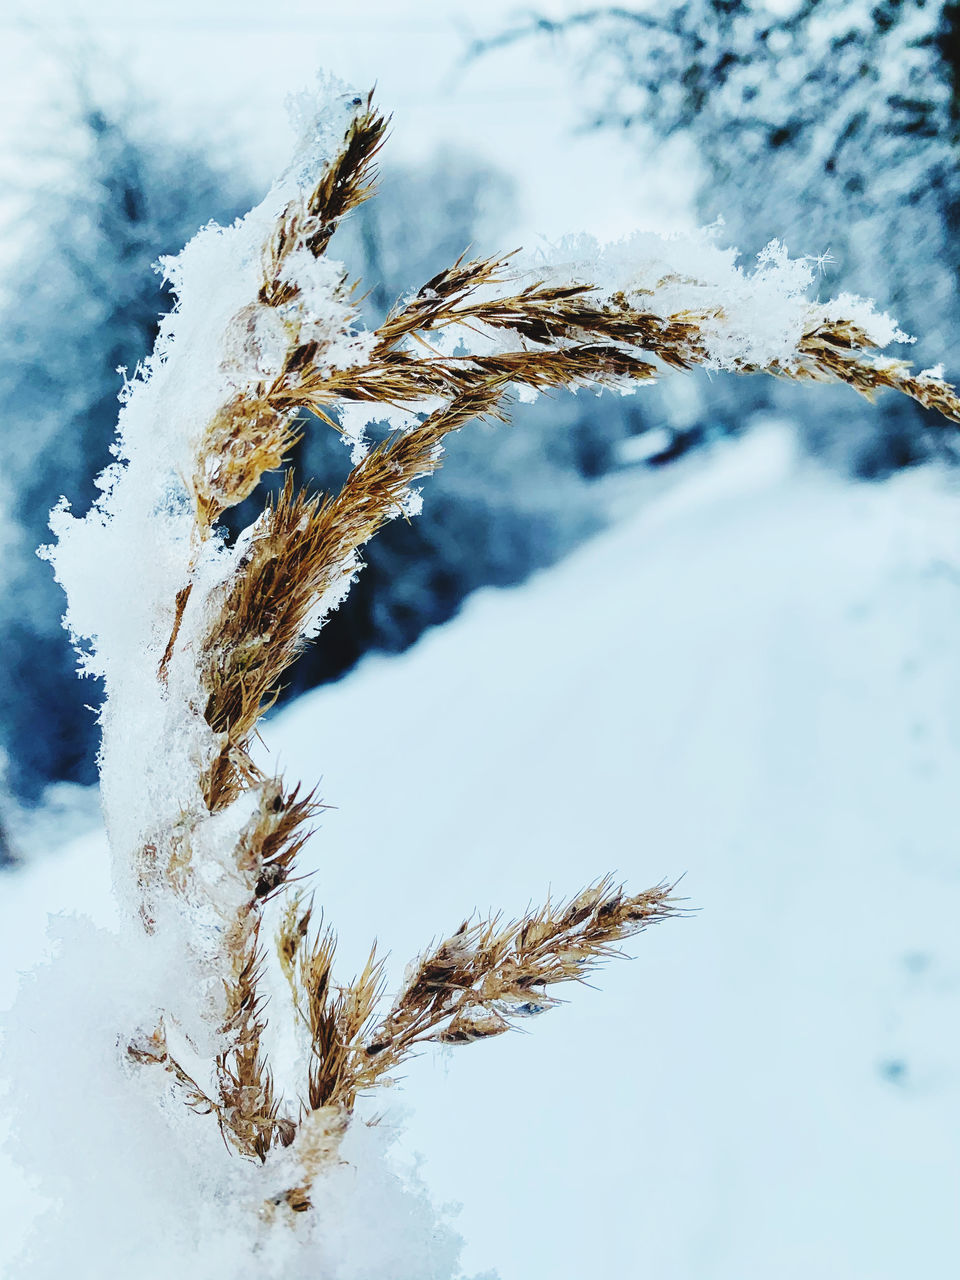 CLOSE-UP OF FROZEN PLANT AGAINST SKY DURING WINTER